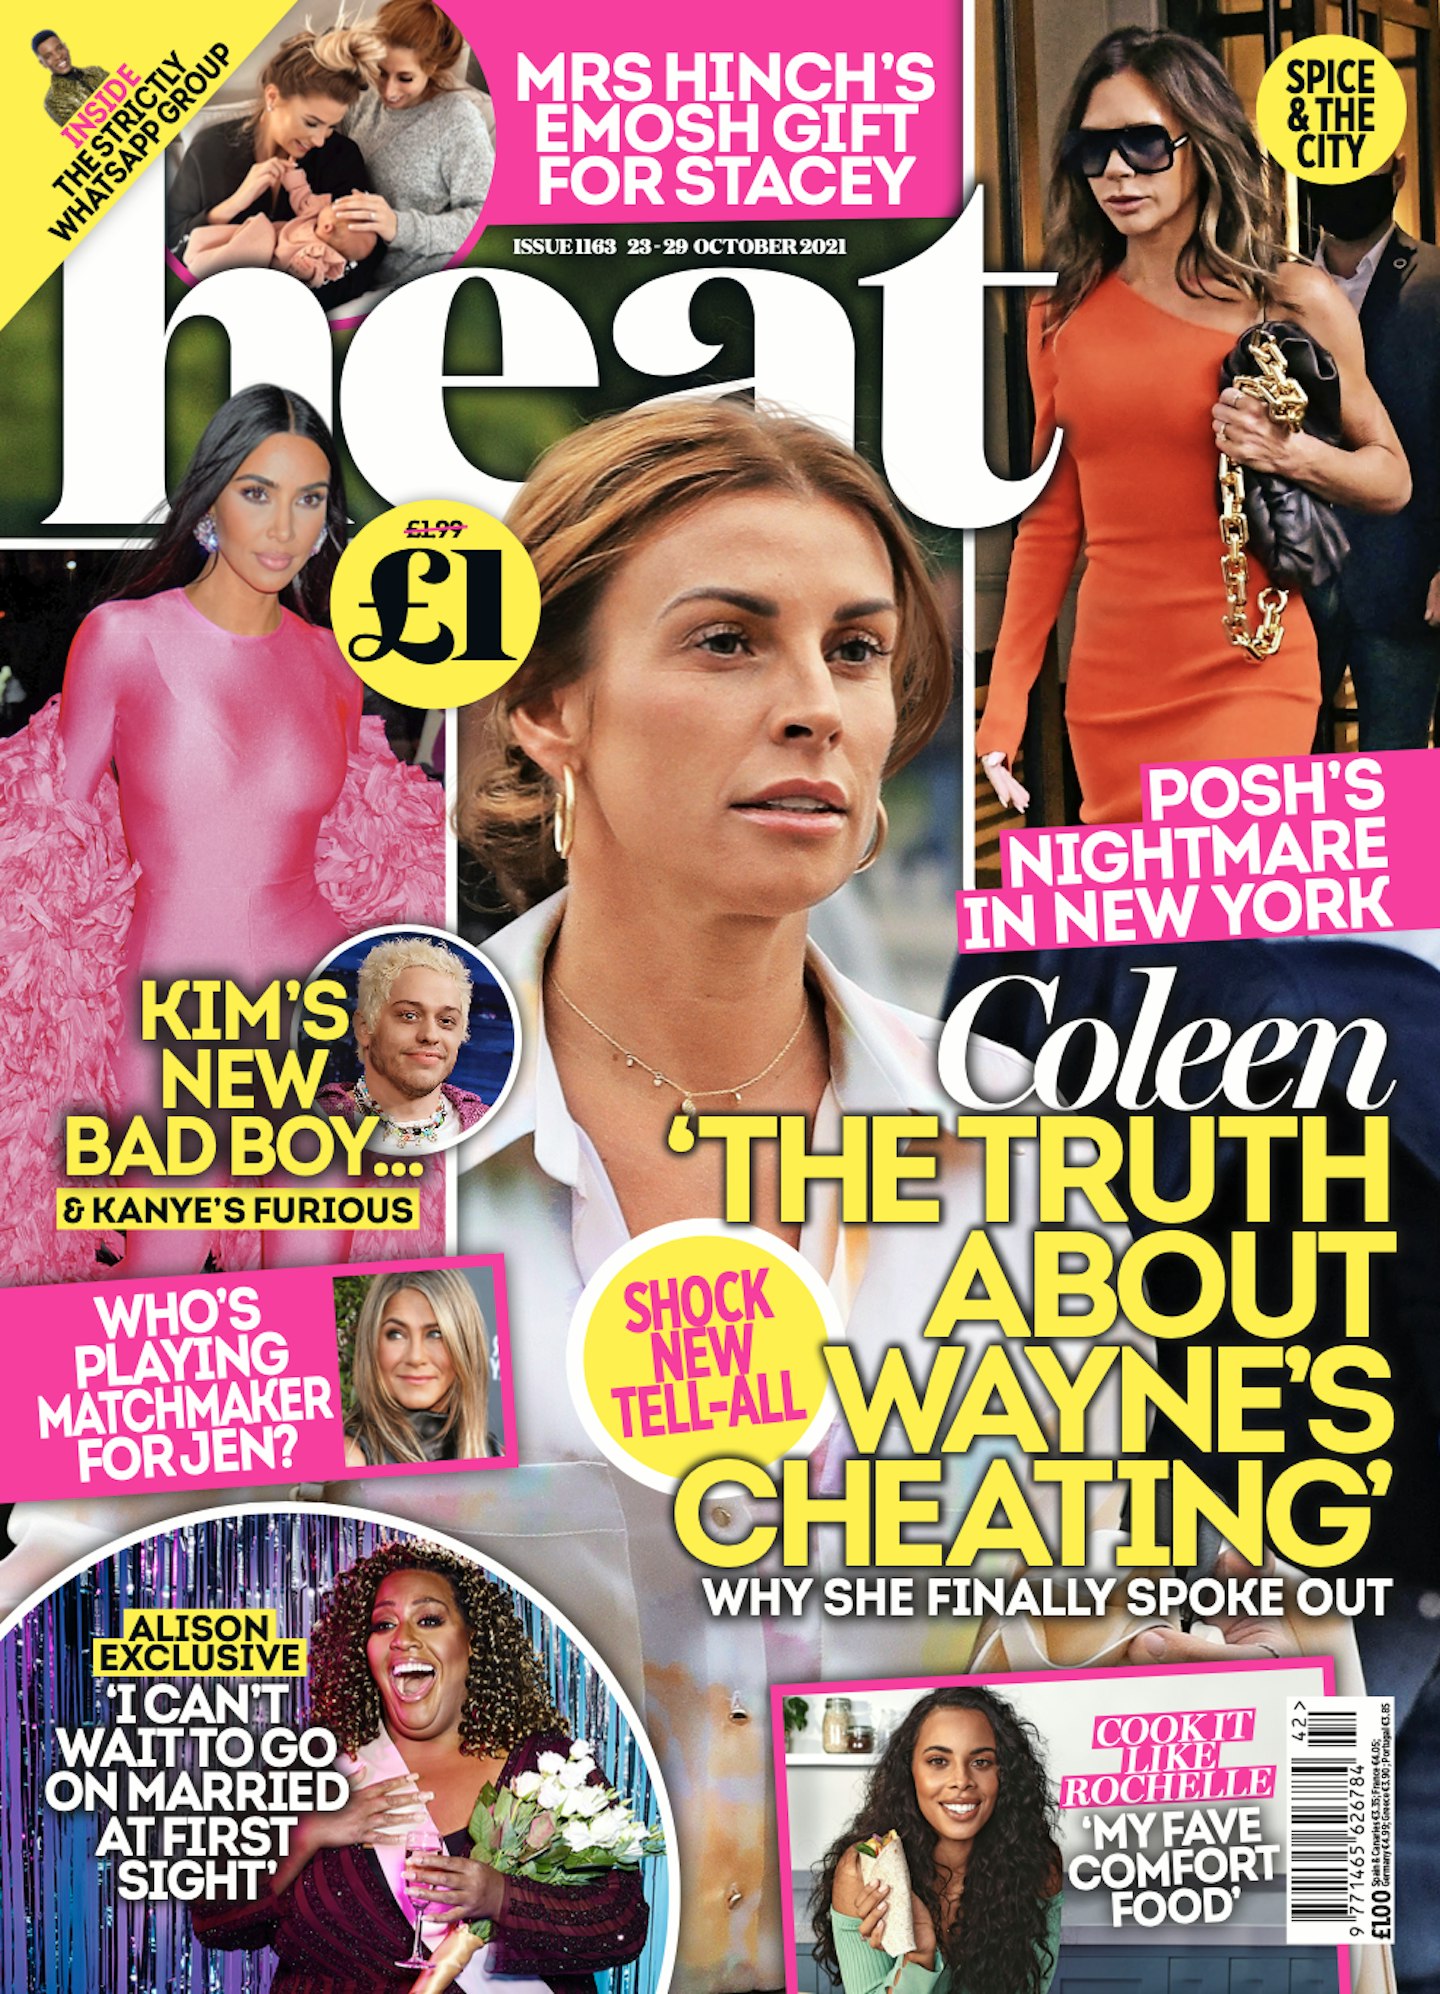 Read more in the latest issue of heat magazine - OUT NOW